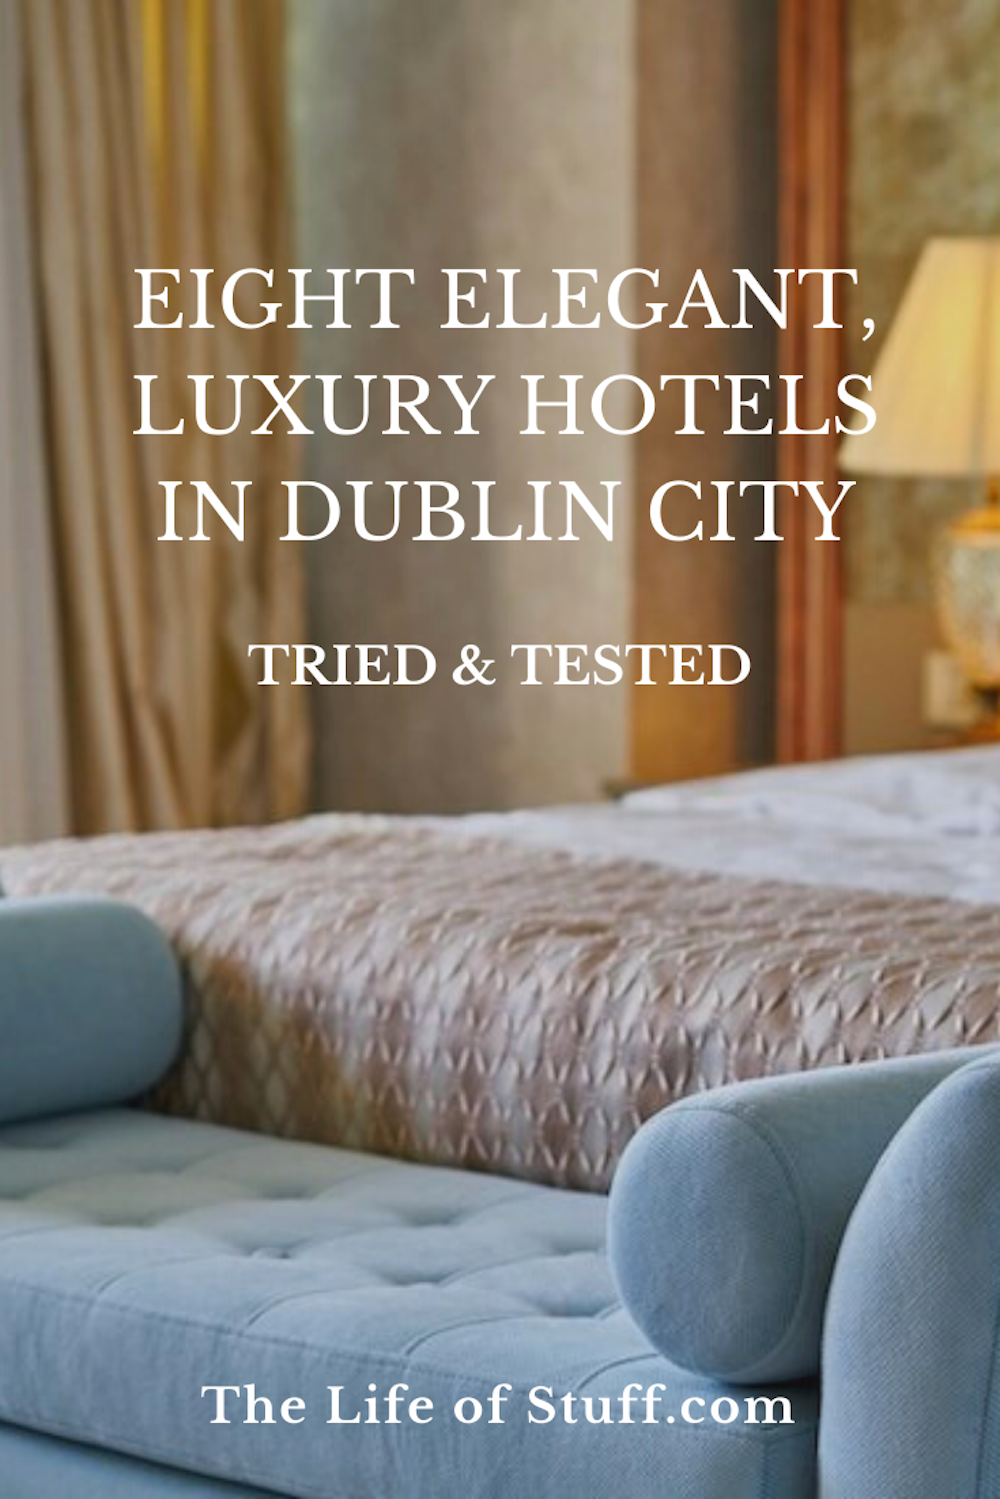 8 Elegant, Luxury Hotels in Dublin City - Tried & Tested - The Life of Stuff